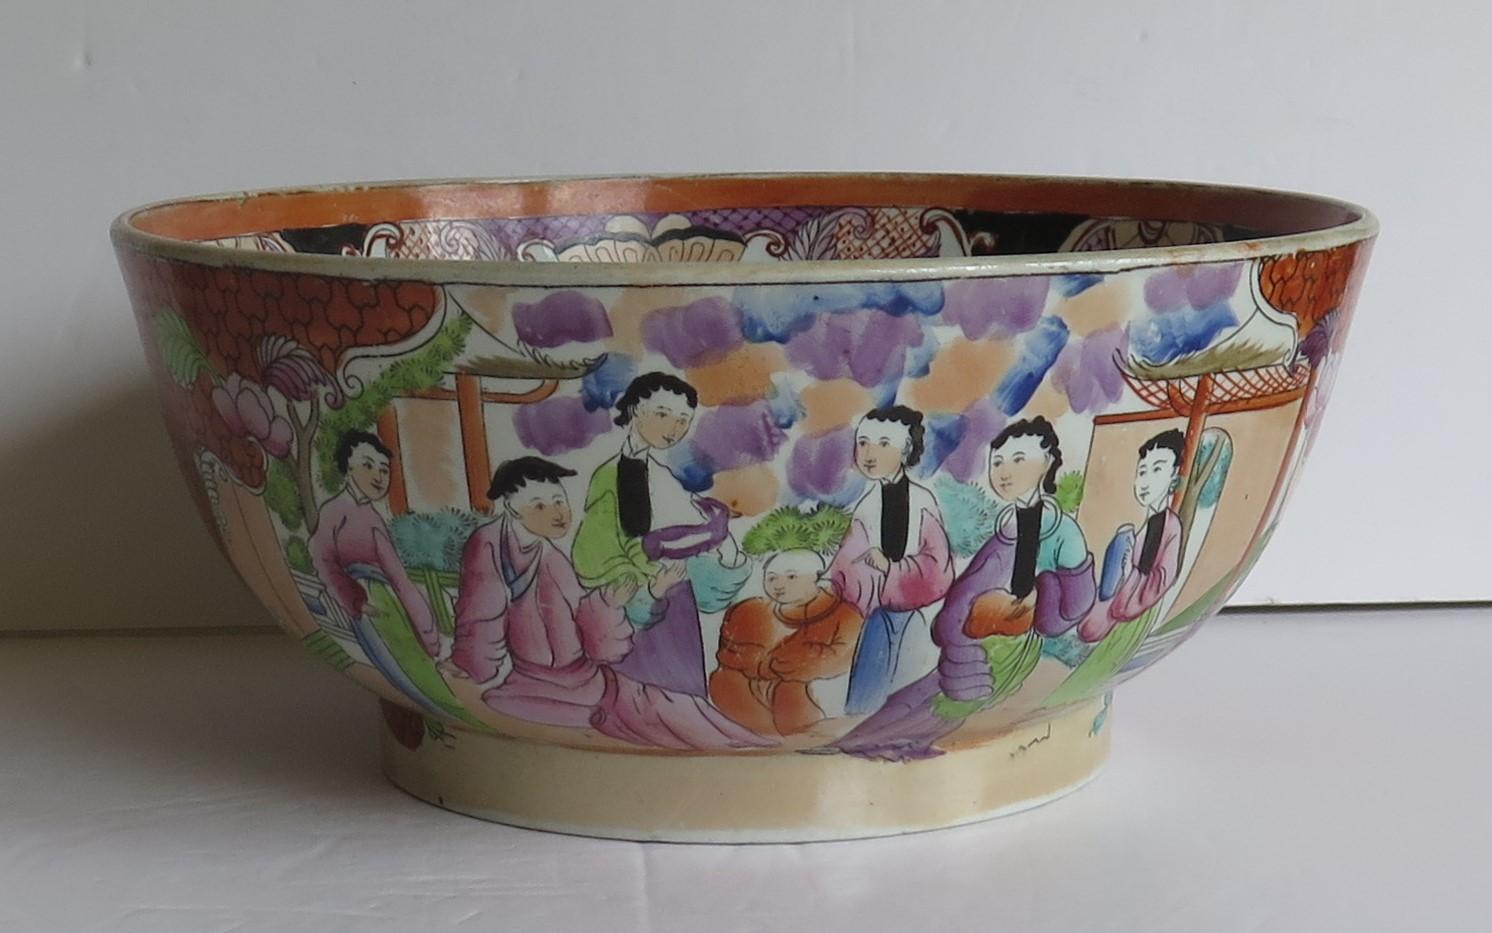 This is a beautiful Mason's Ironstone pottery large bowl in the very decorative Red Scale Sacrificial Lamb, oriental people pattern, produced by the Mason's factory at Lane Delph, Staffordshire, England, circa 1813-1815.

This large bowl is well